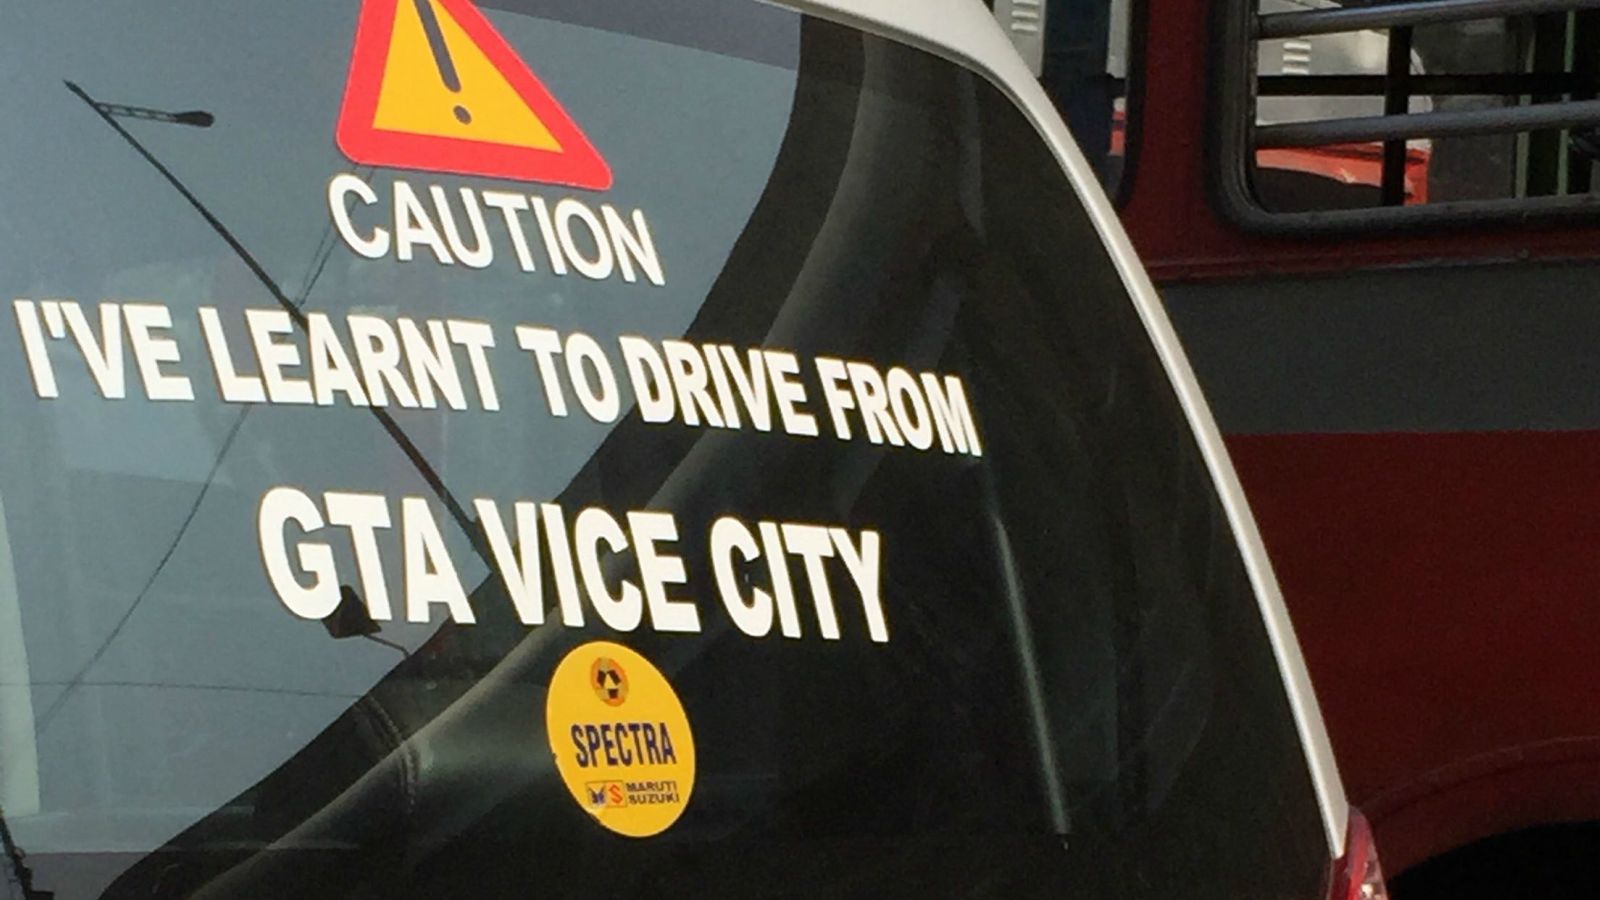 27 Funny Bumper Stickers That Will Make You Do a Double Take